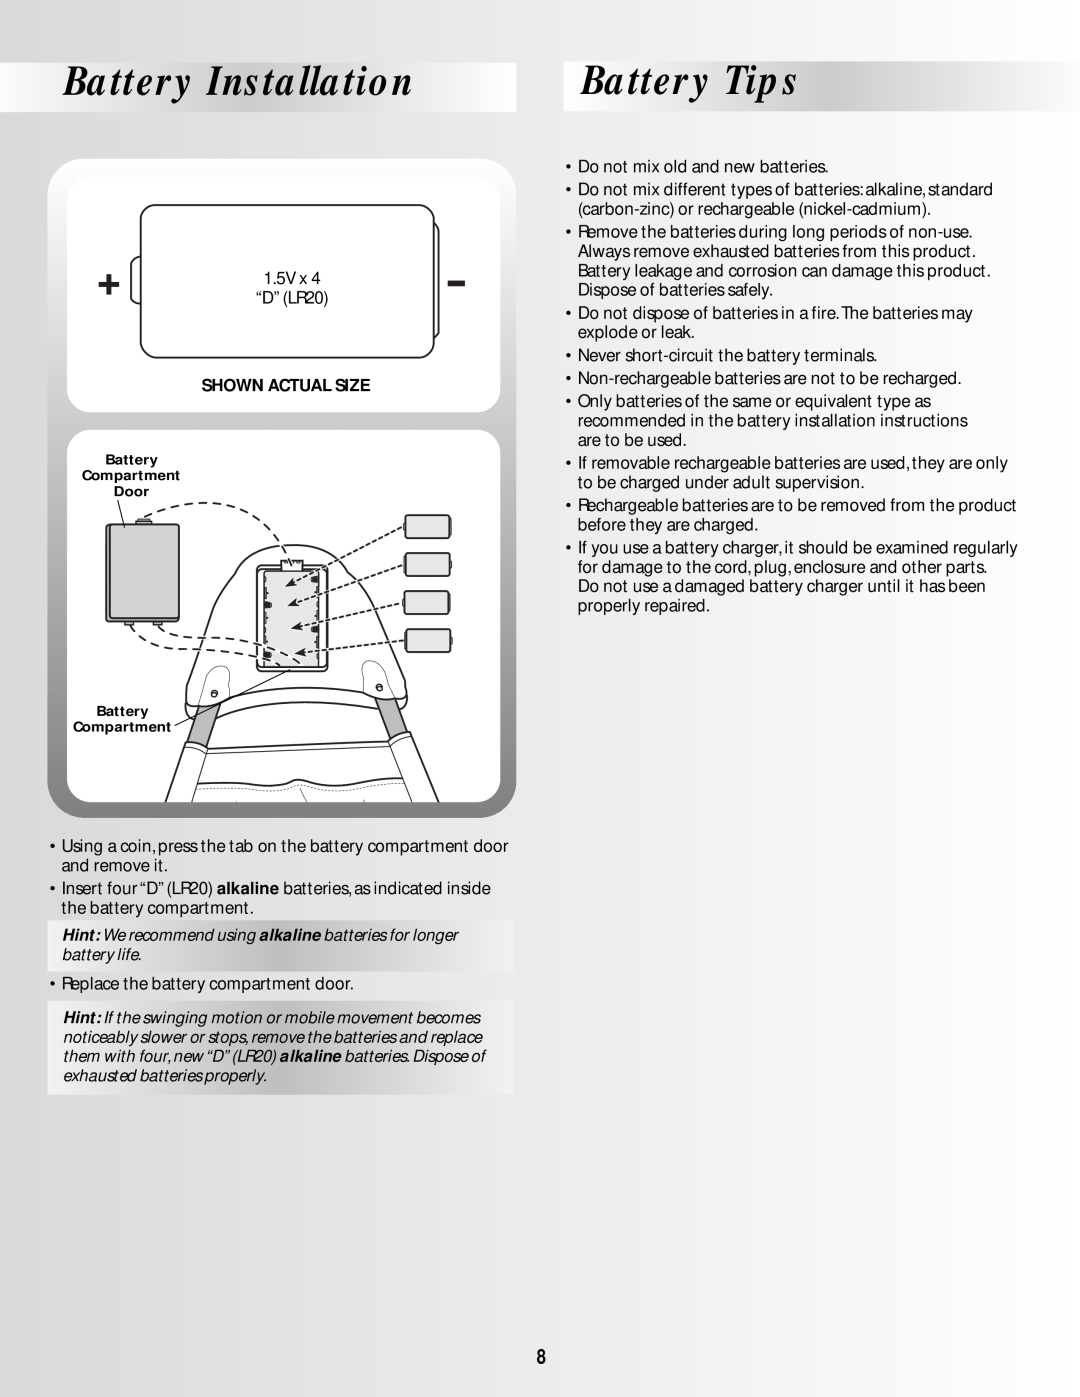 Fisher-Price BO639 instruction sheet Battery Installation, Battery Tips, Shown Actual Size 